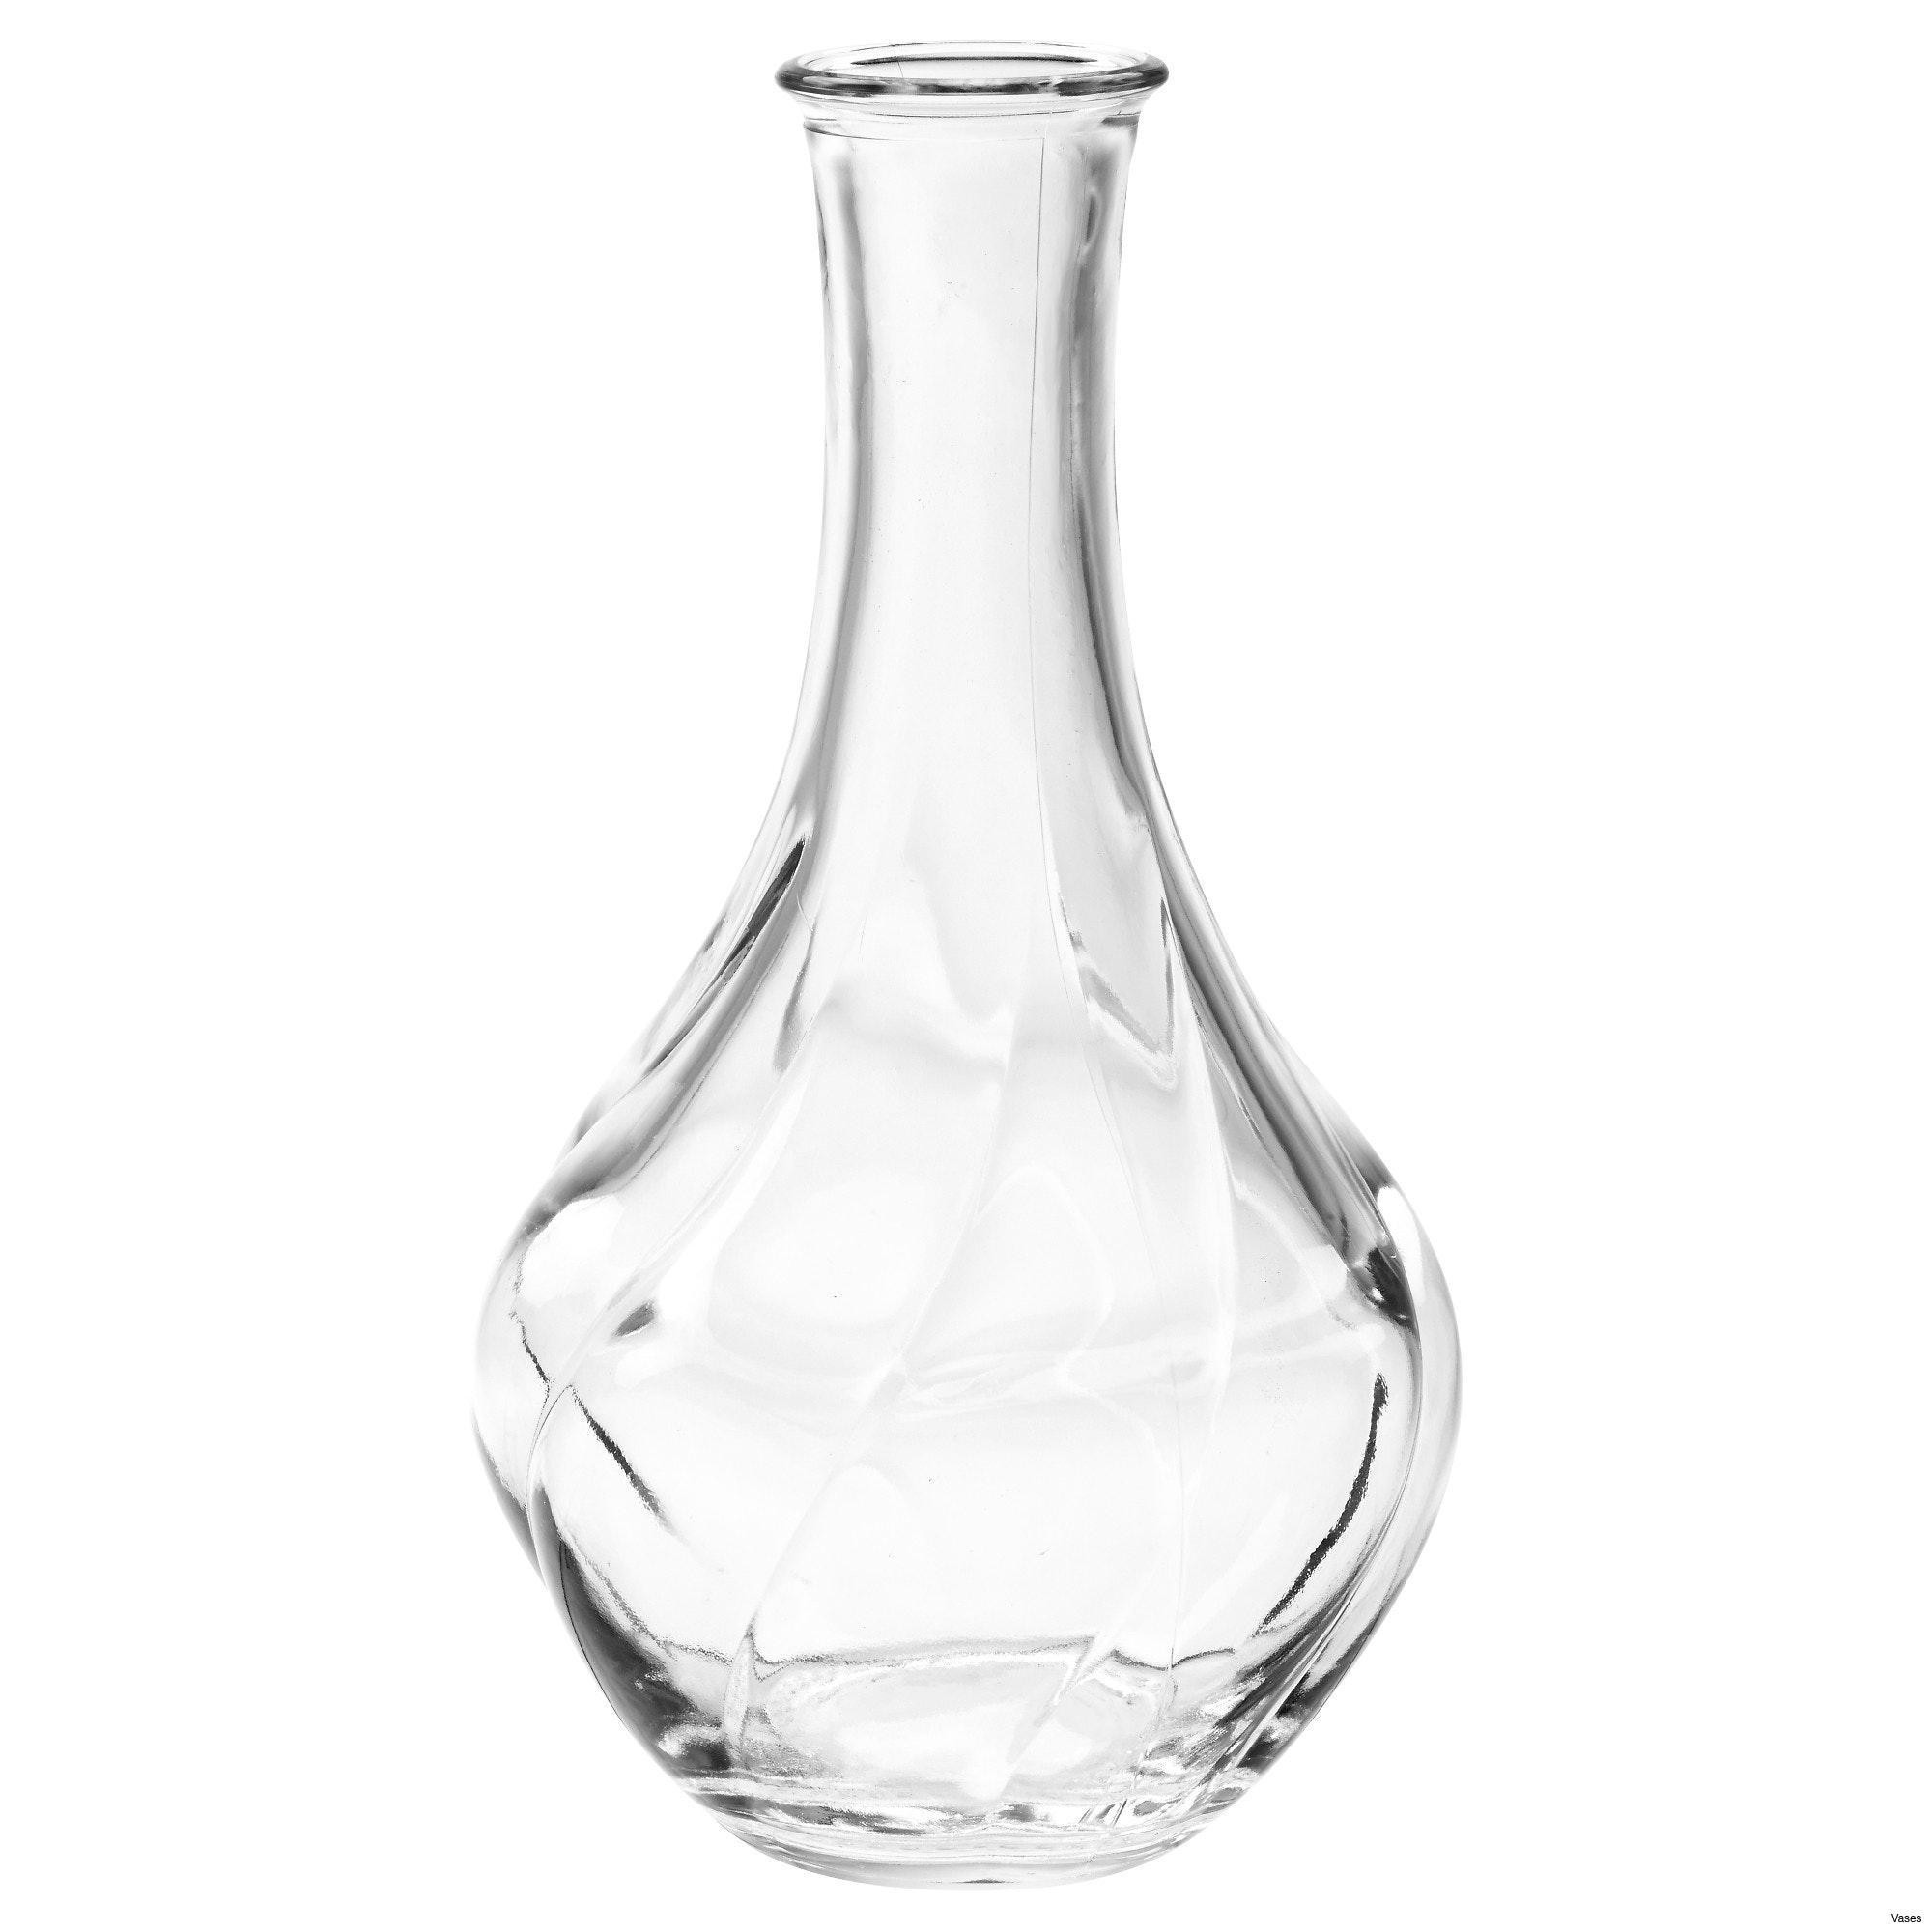 16 Recommended Tall Brown Glass Vase 2024 free download tall brown glass vase of large black vase collection living room glass vases fresh clear vase pertaining to large black vase collection living room glass vases fresh clear vase 0d tags amazi